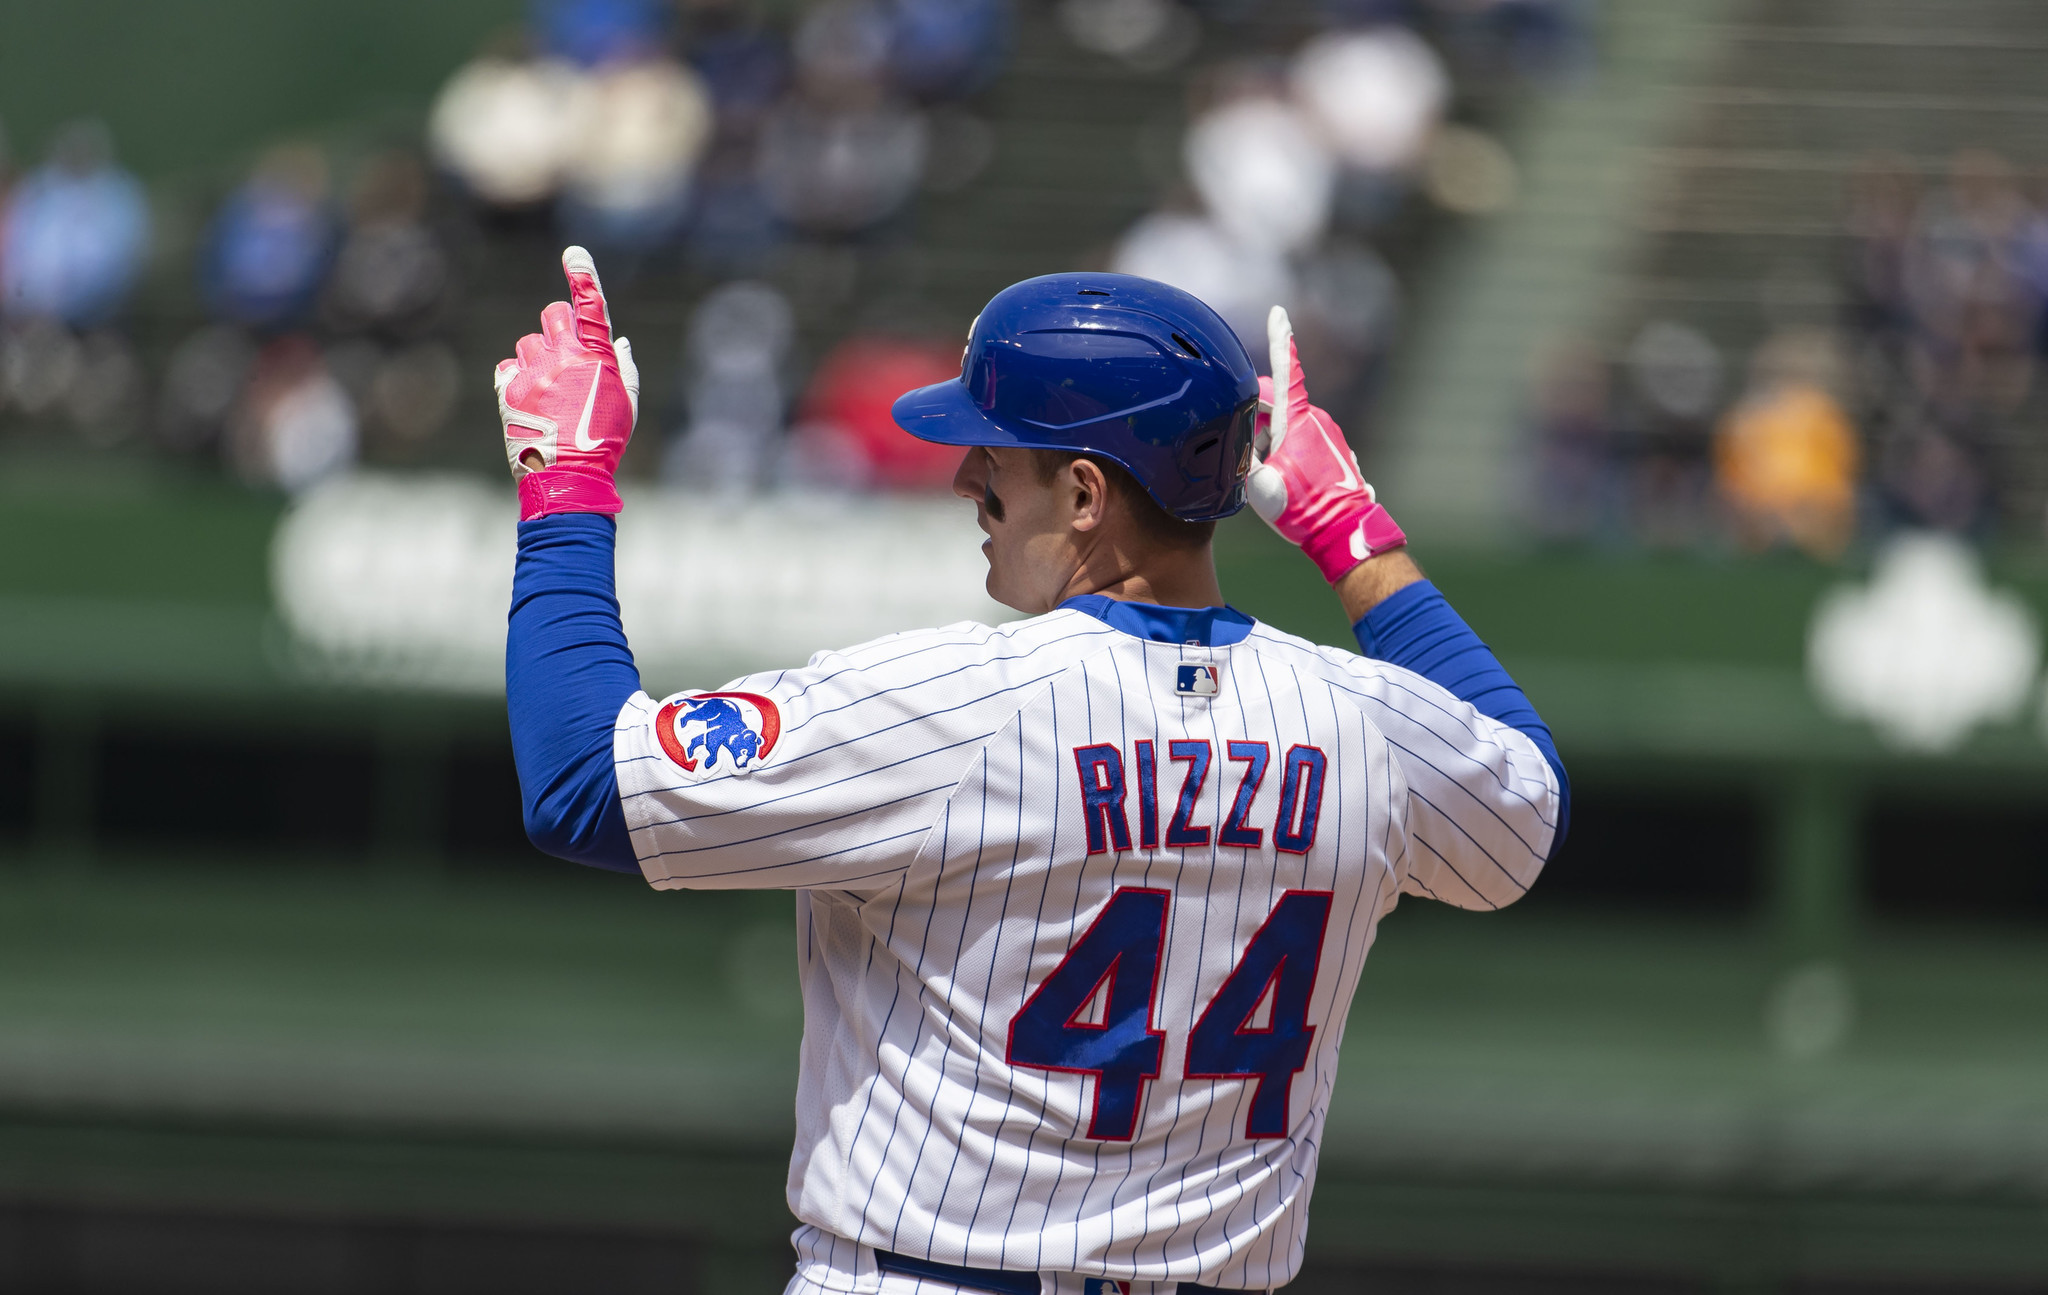 Buy Anthony Rizzo Chicago Cubs 2012 2021 thanks for the memories